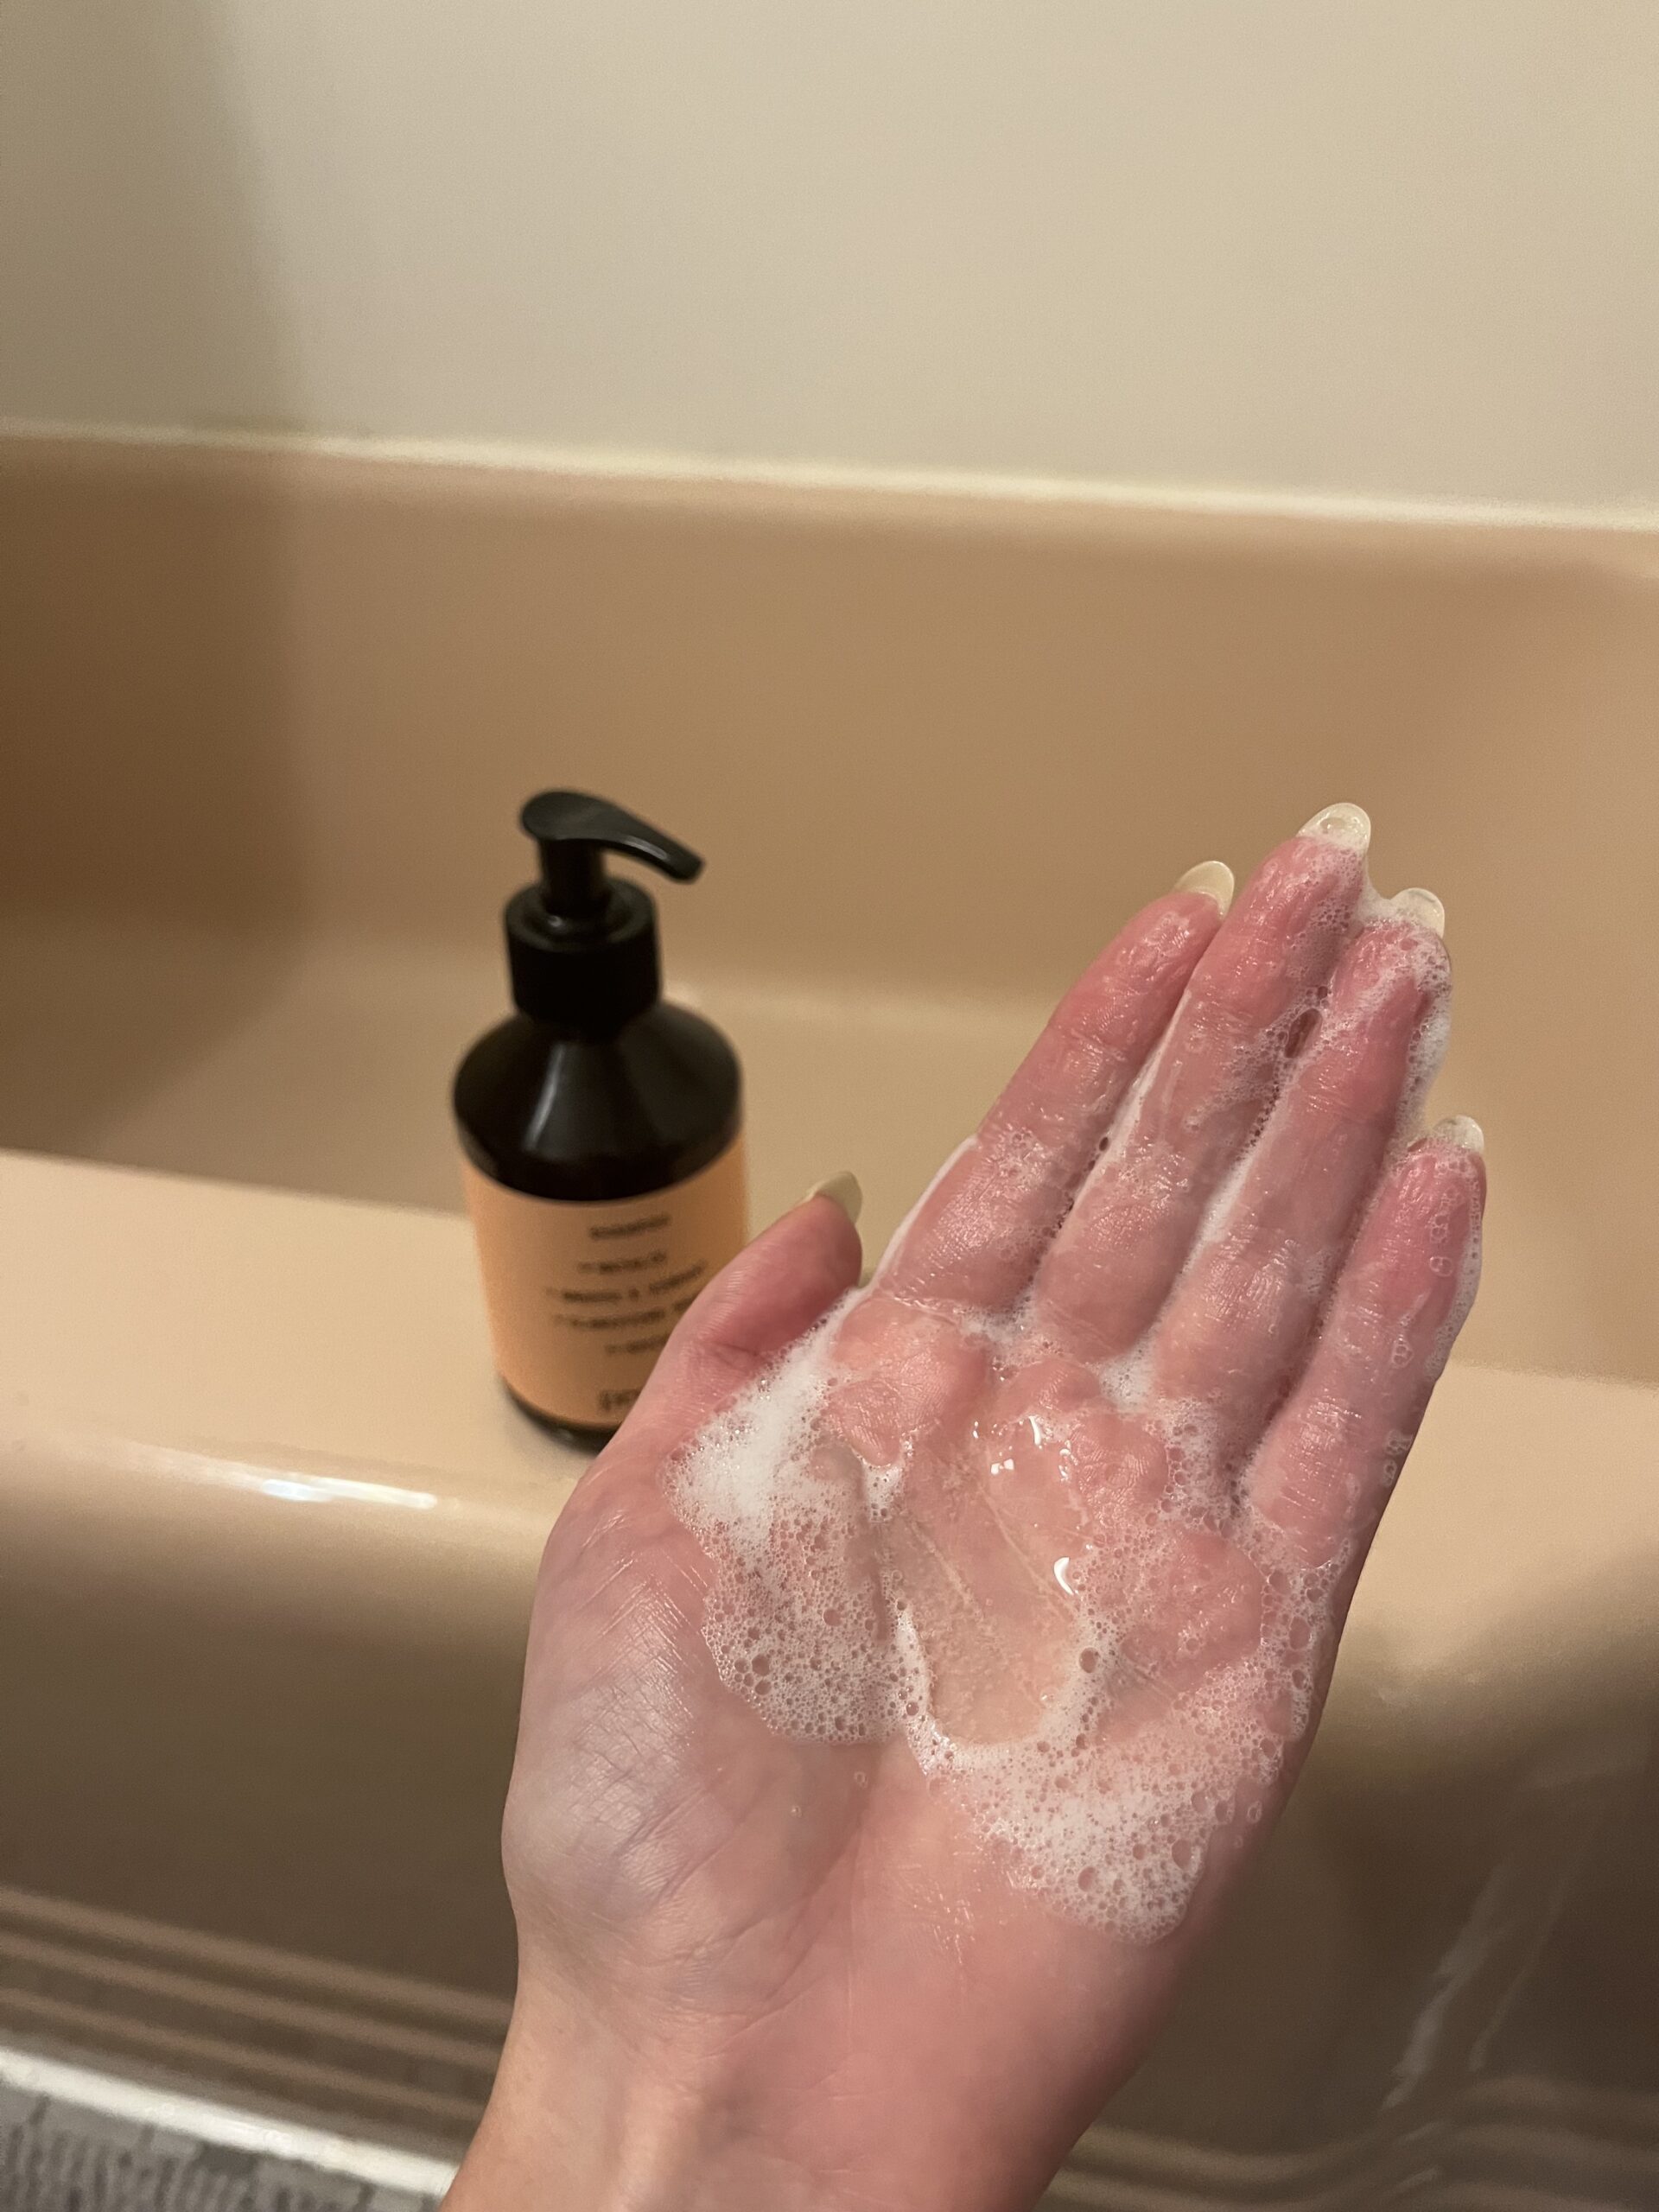 A hand covered in suds next to a bottle of Prose